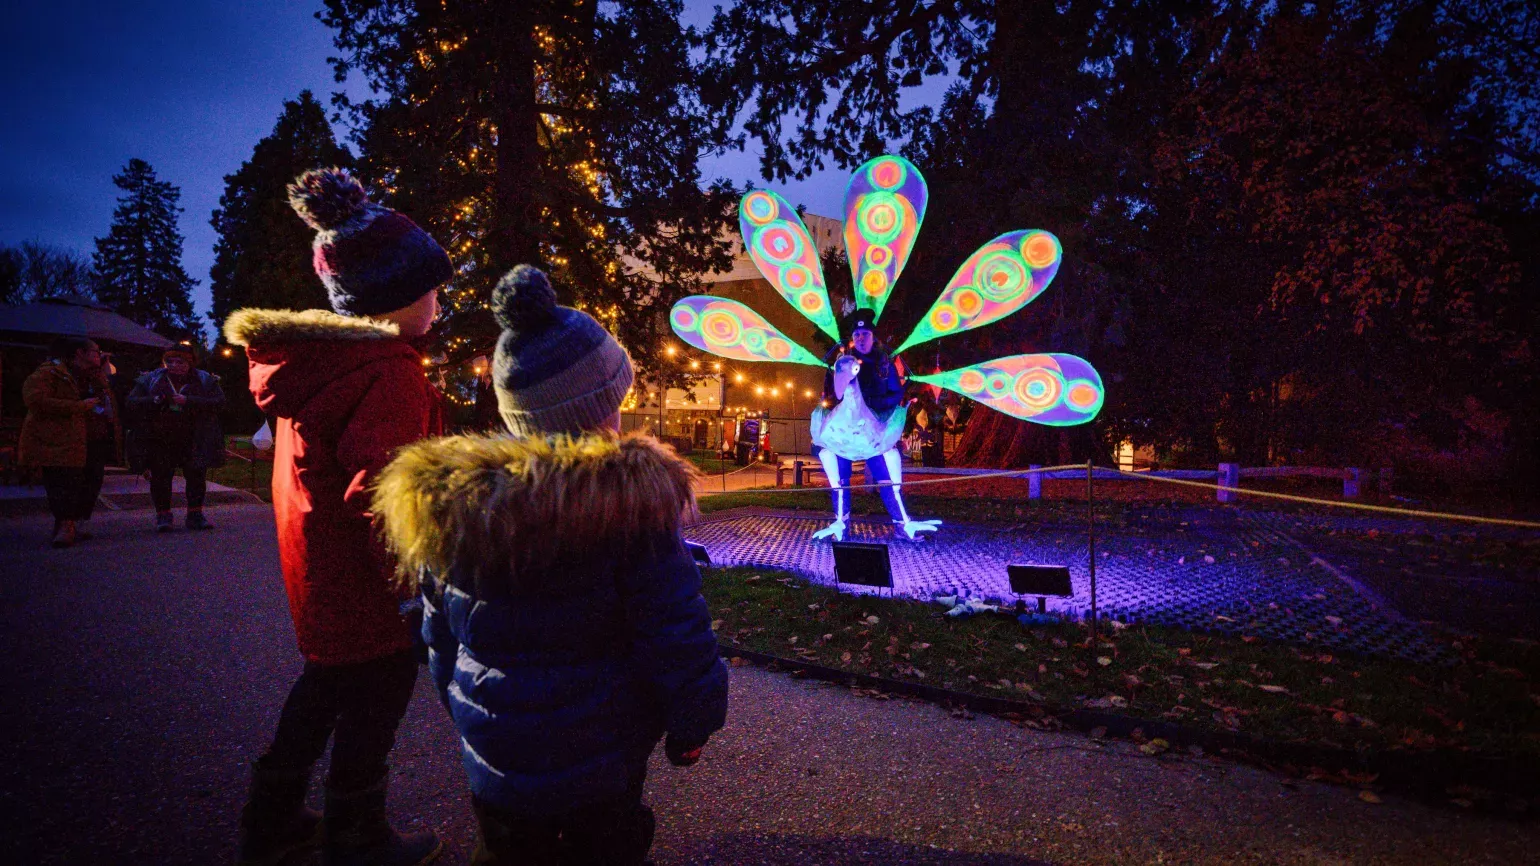 Two children in winter clothing watch a glowing peacock installation on a Christmas lights trail